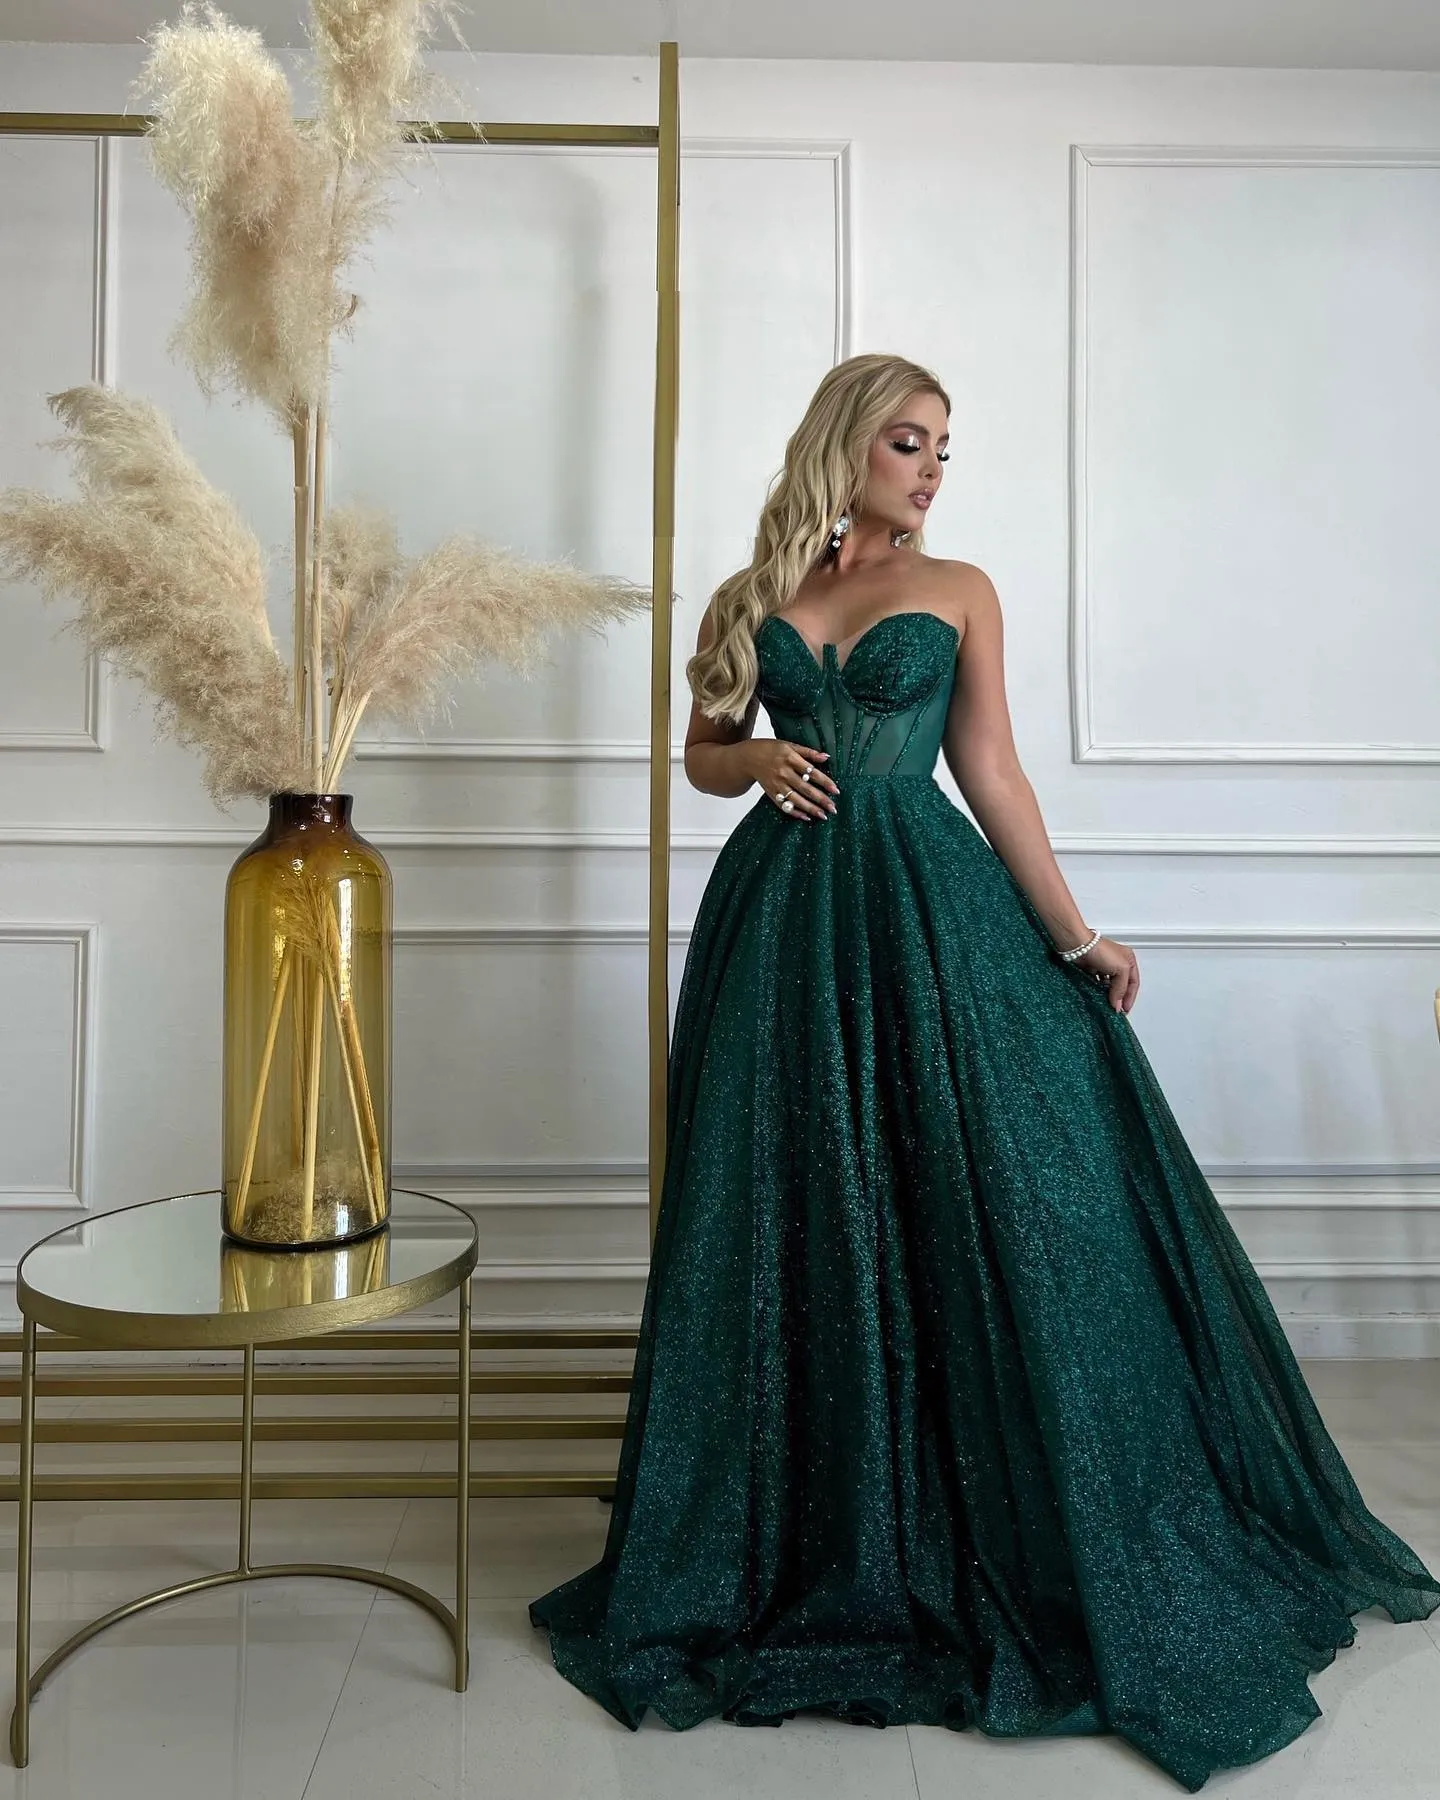 Bottle Green Ball Gown With Off Shoulder Neckline And Embellished Geometric  Pattern Online - Kalki Fashion | Indowestern gowns, Ball gowns, Green ball  gown